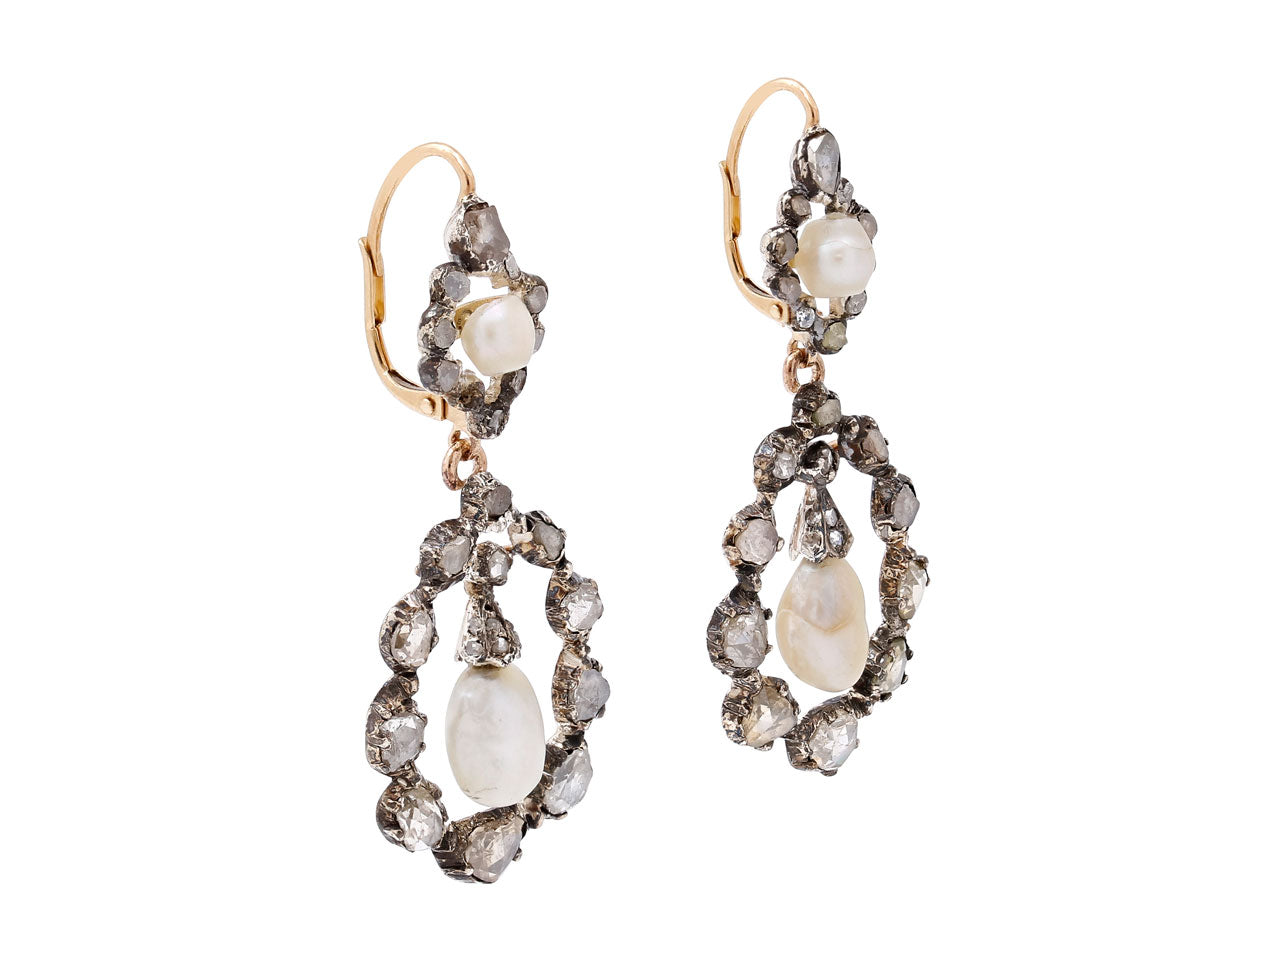 Antique Georgian Diamond and Pearl Earrings in Silver Over 9K Gold